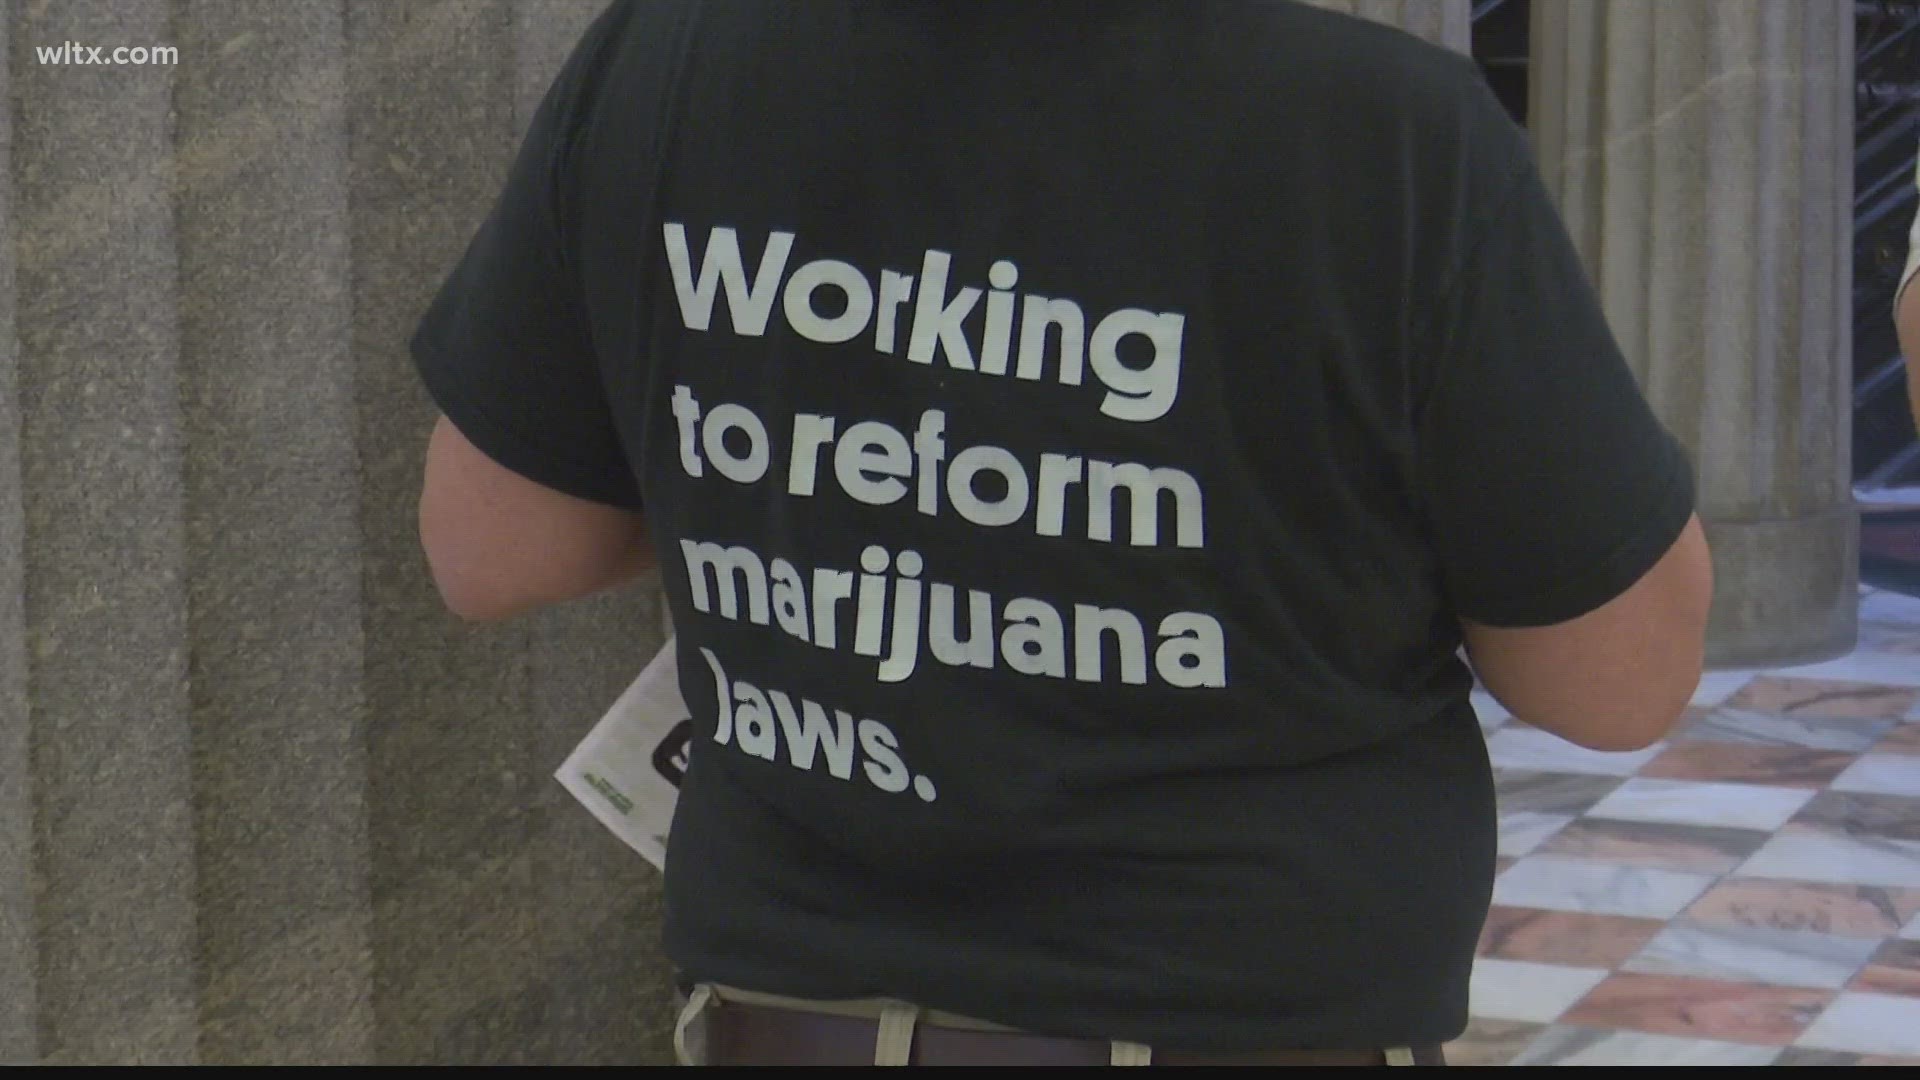 A group of veterans met at the State House today to talk to lawmakers about medical marijuana.